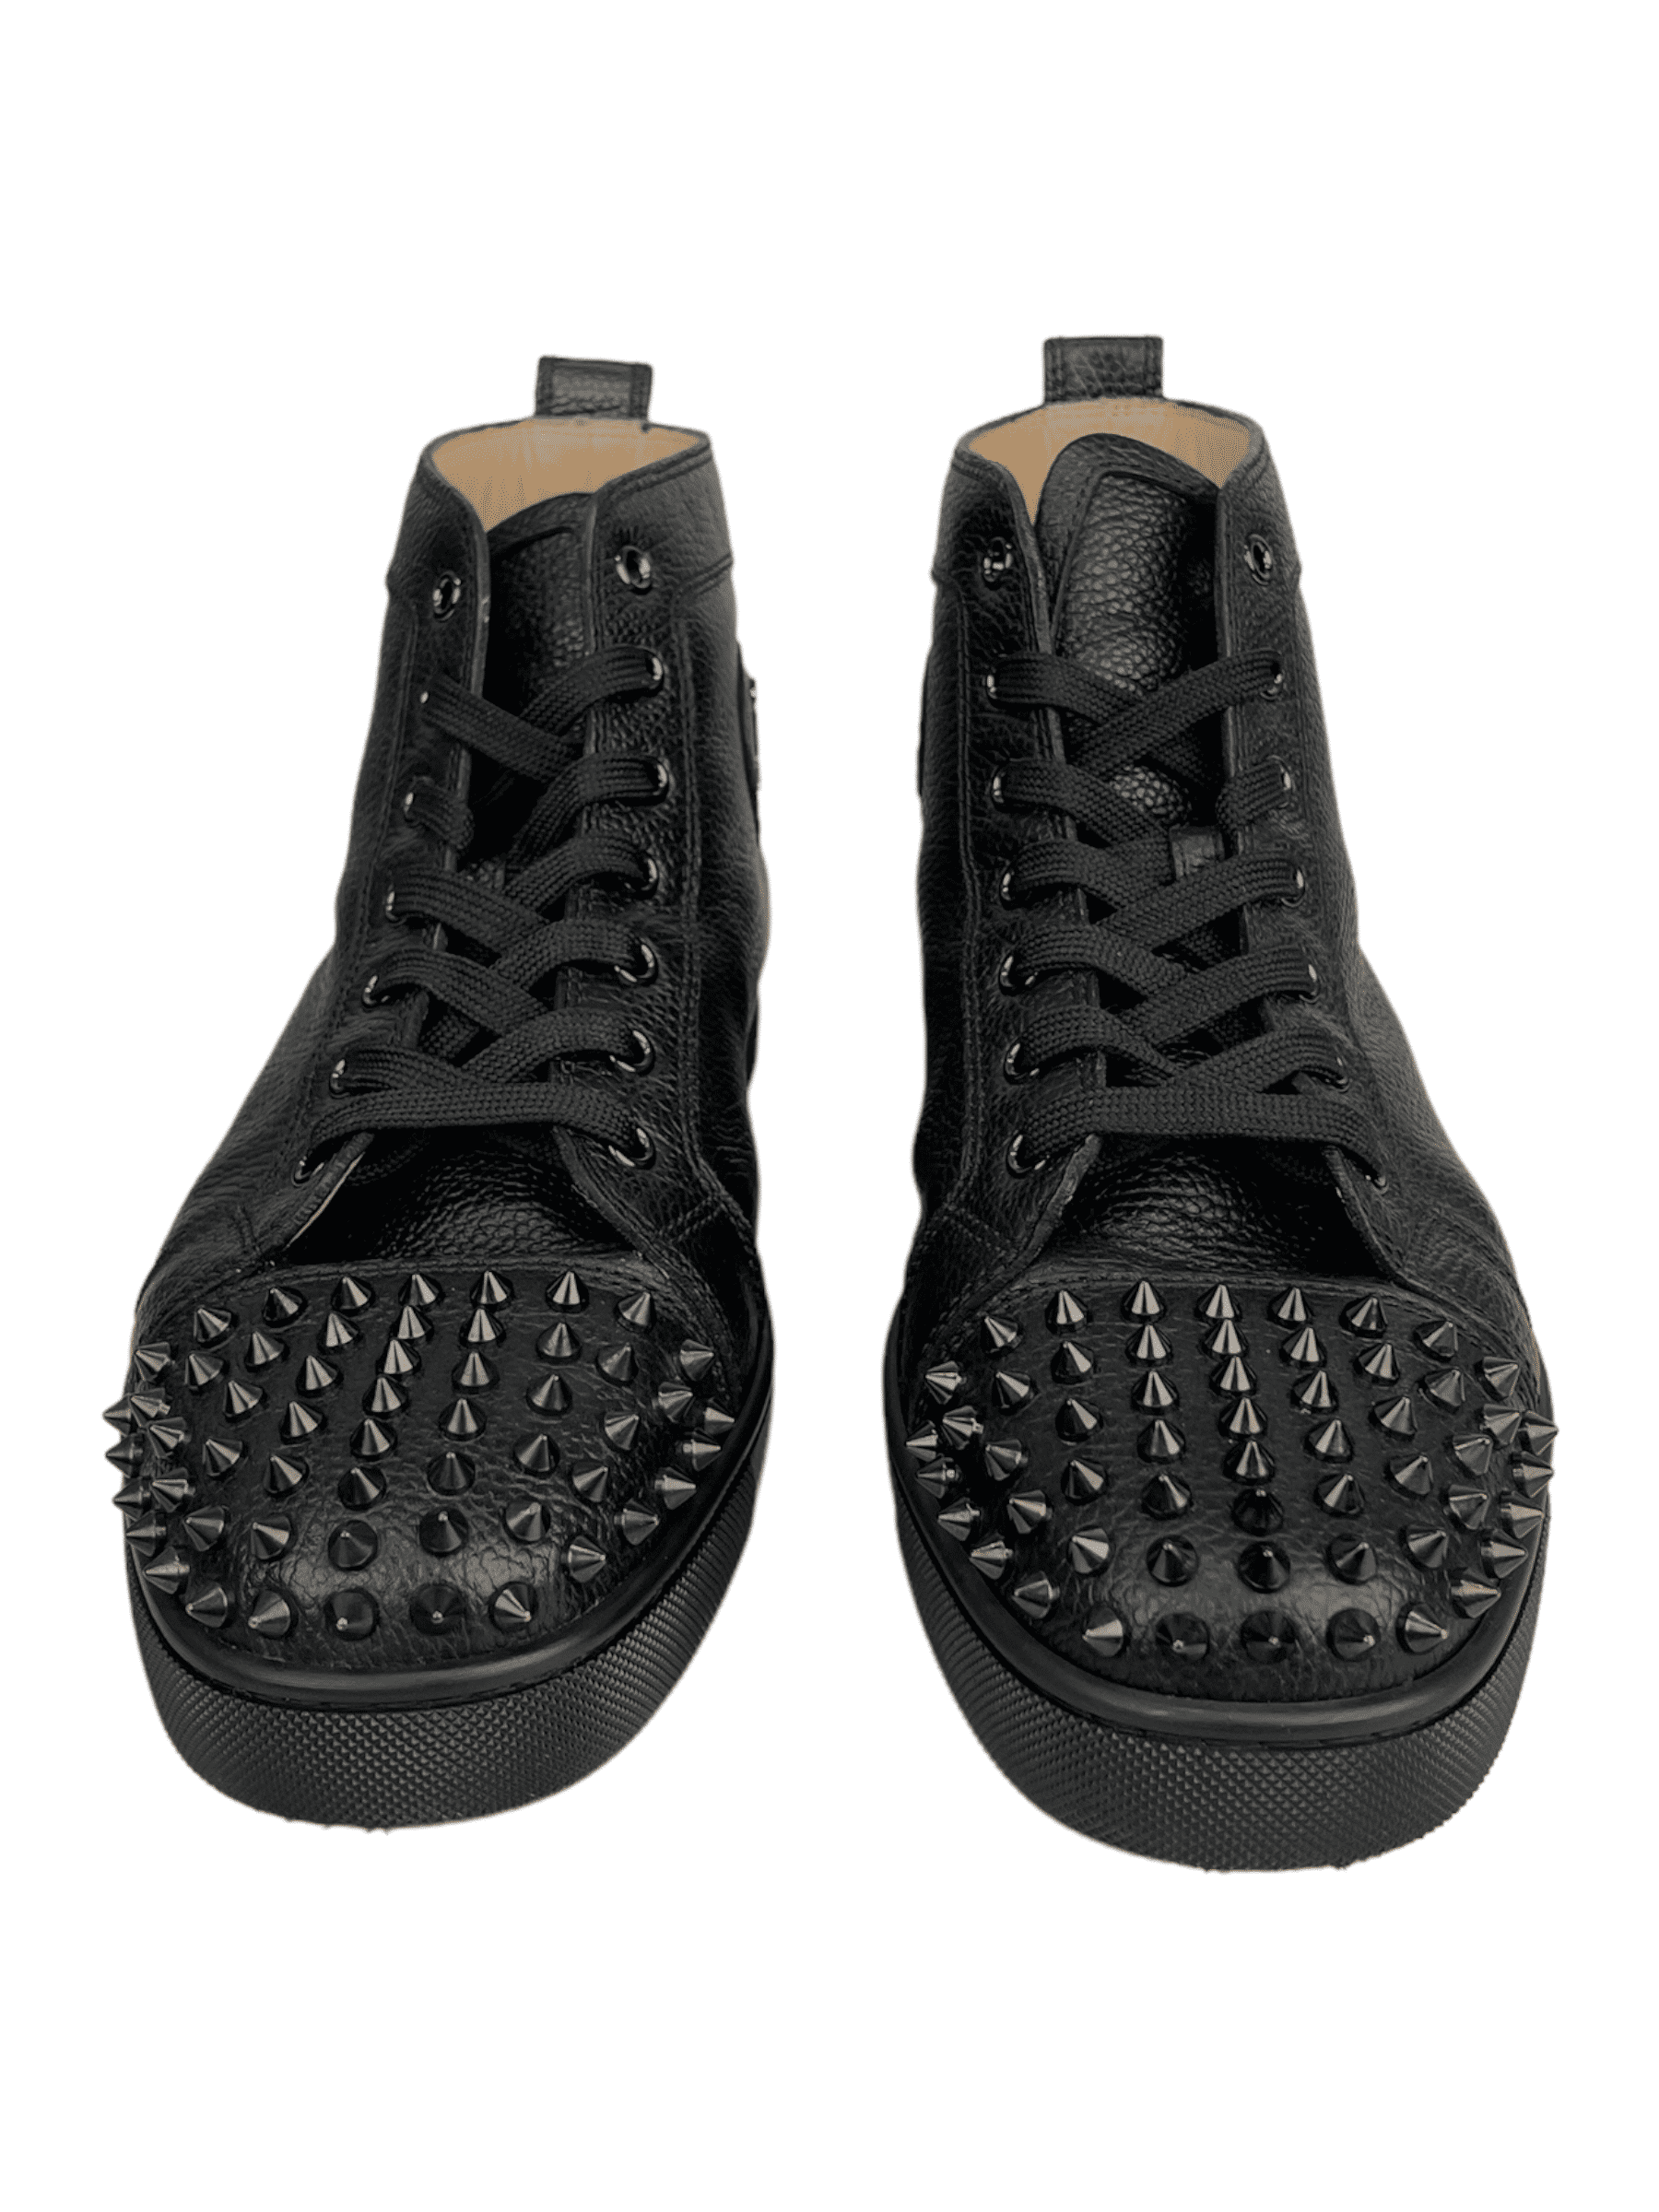 træthed Ombord kobling Christian Louboutin Black Patent Leather Louis Spikes High